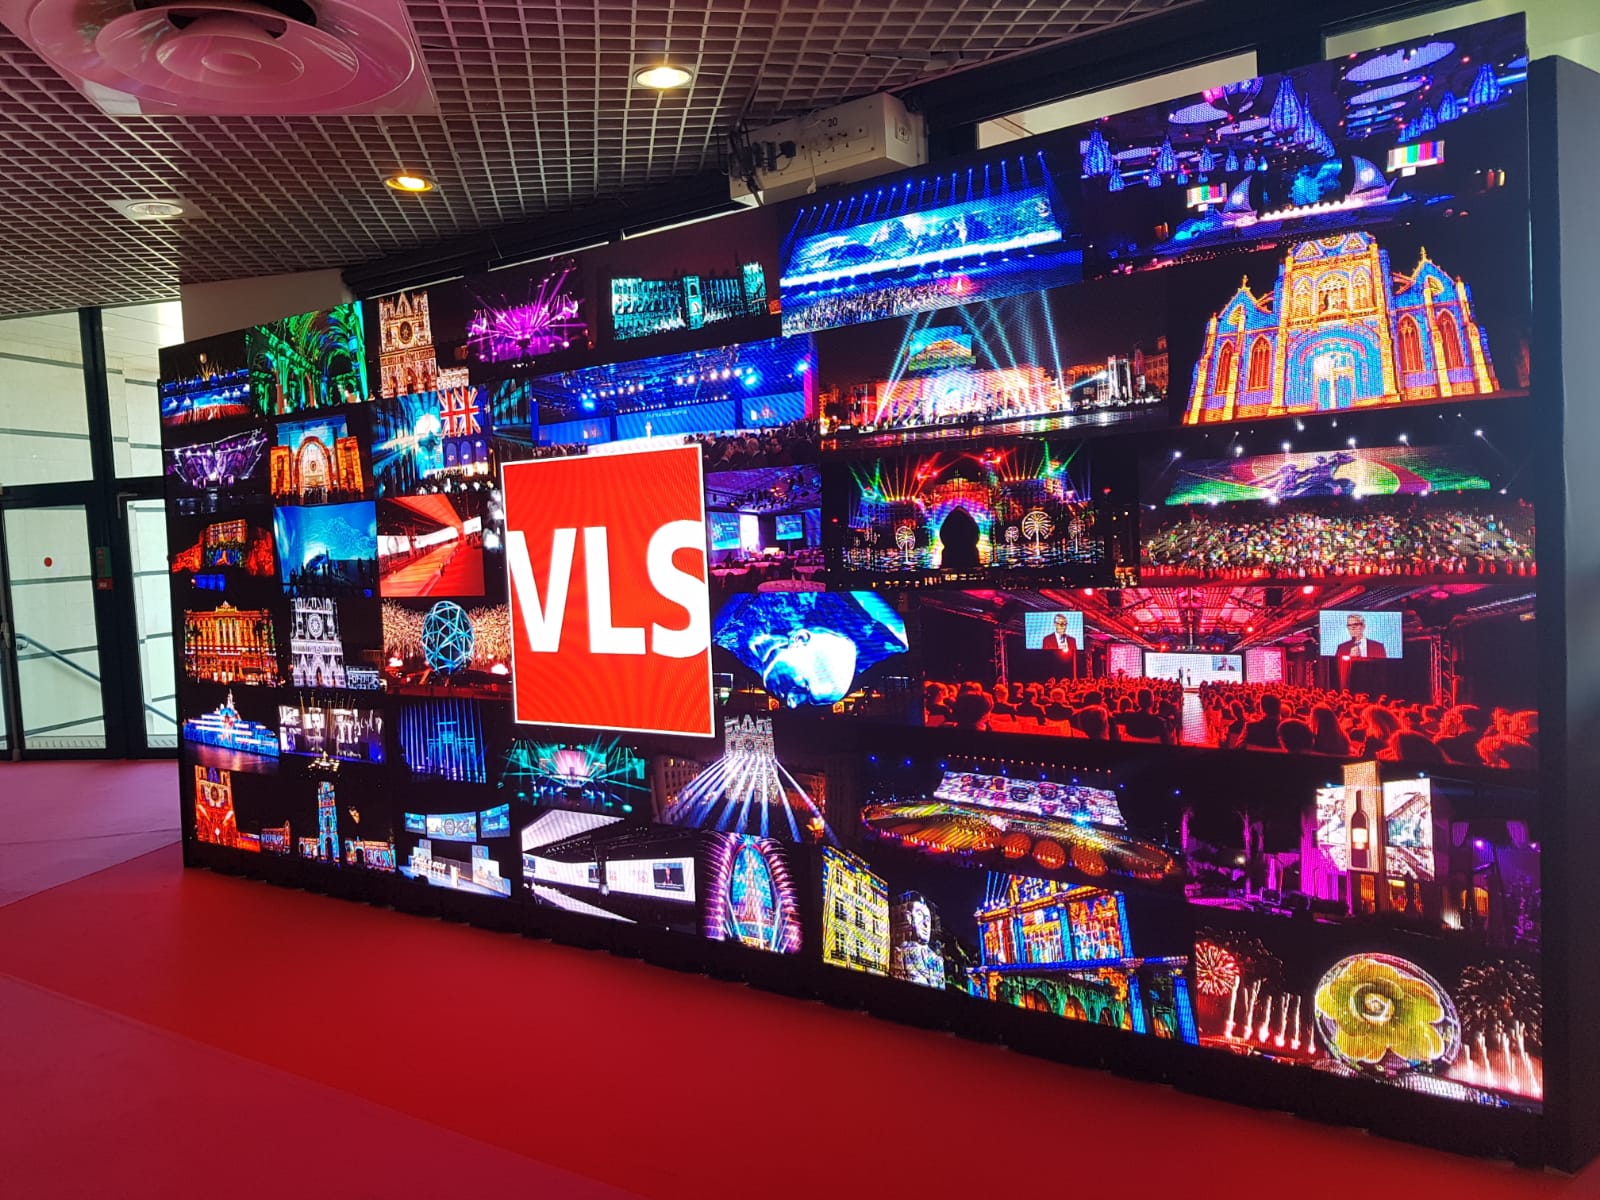 LED Wall sur Heavent Cannes